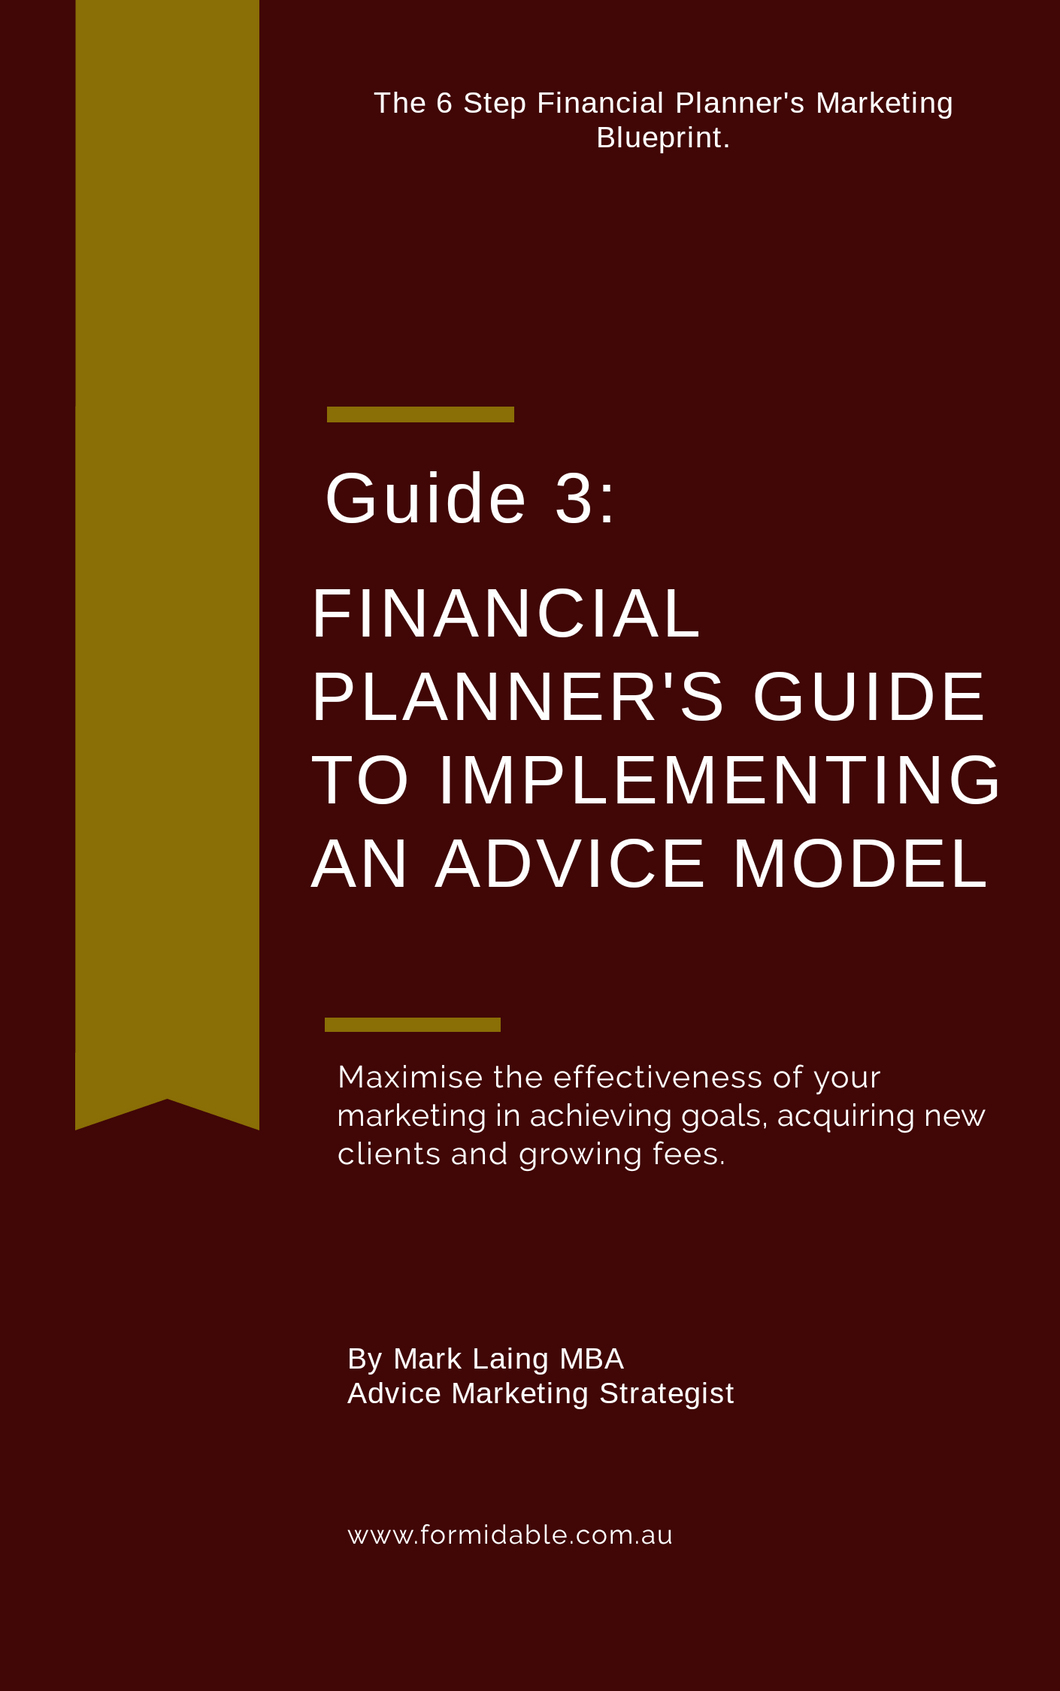 Guide 3: Financial Planner's Guide to Implementing an Advice Model